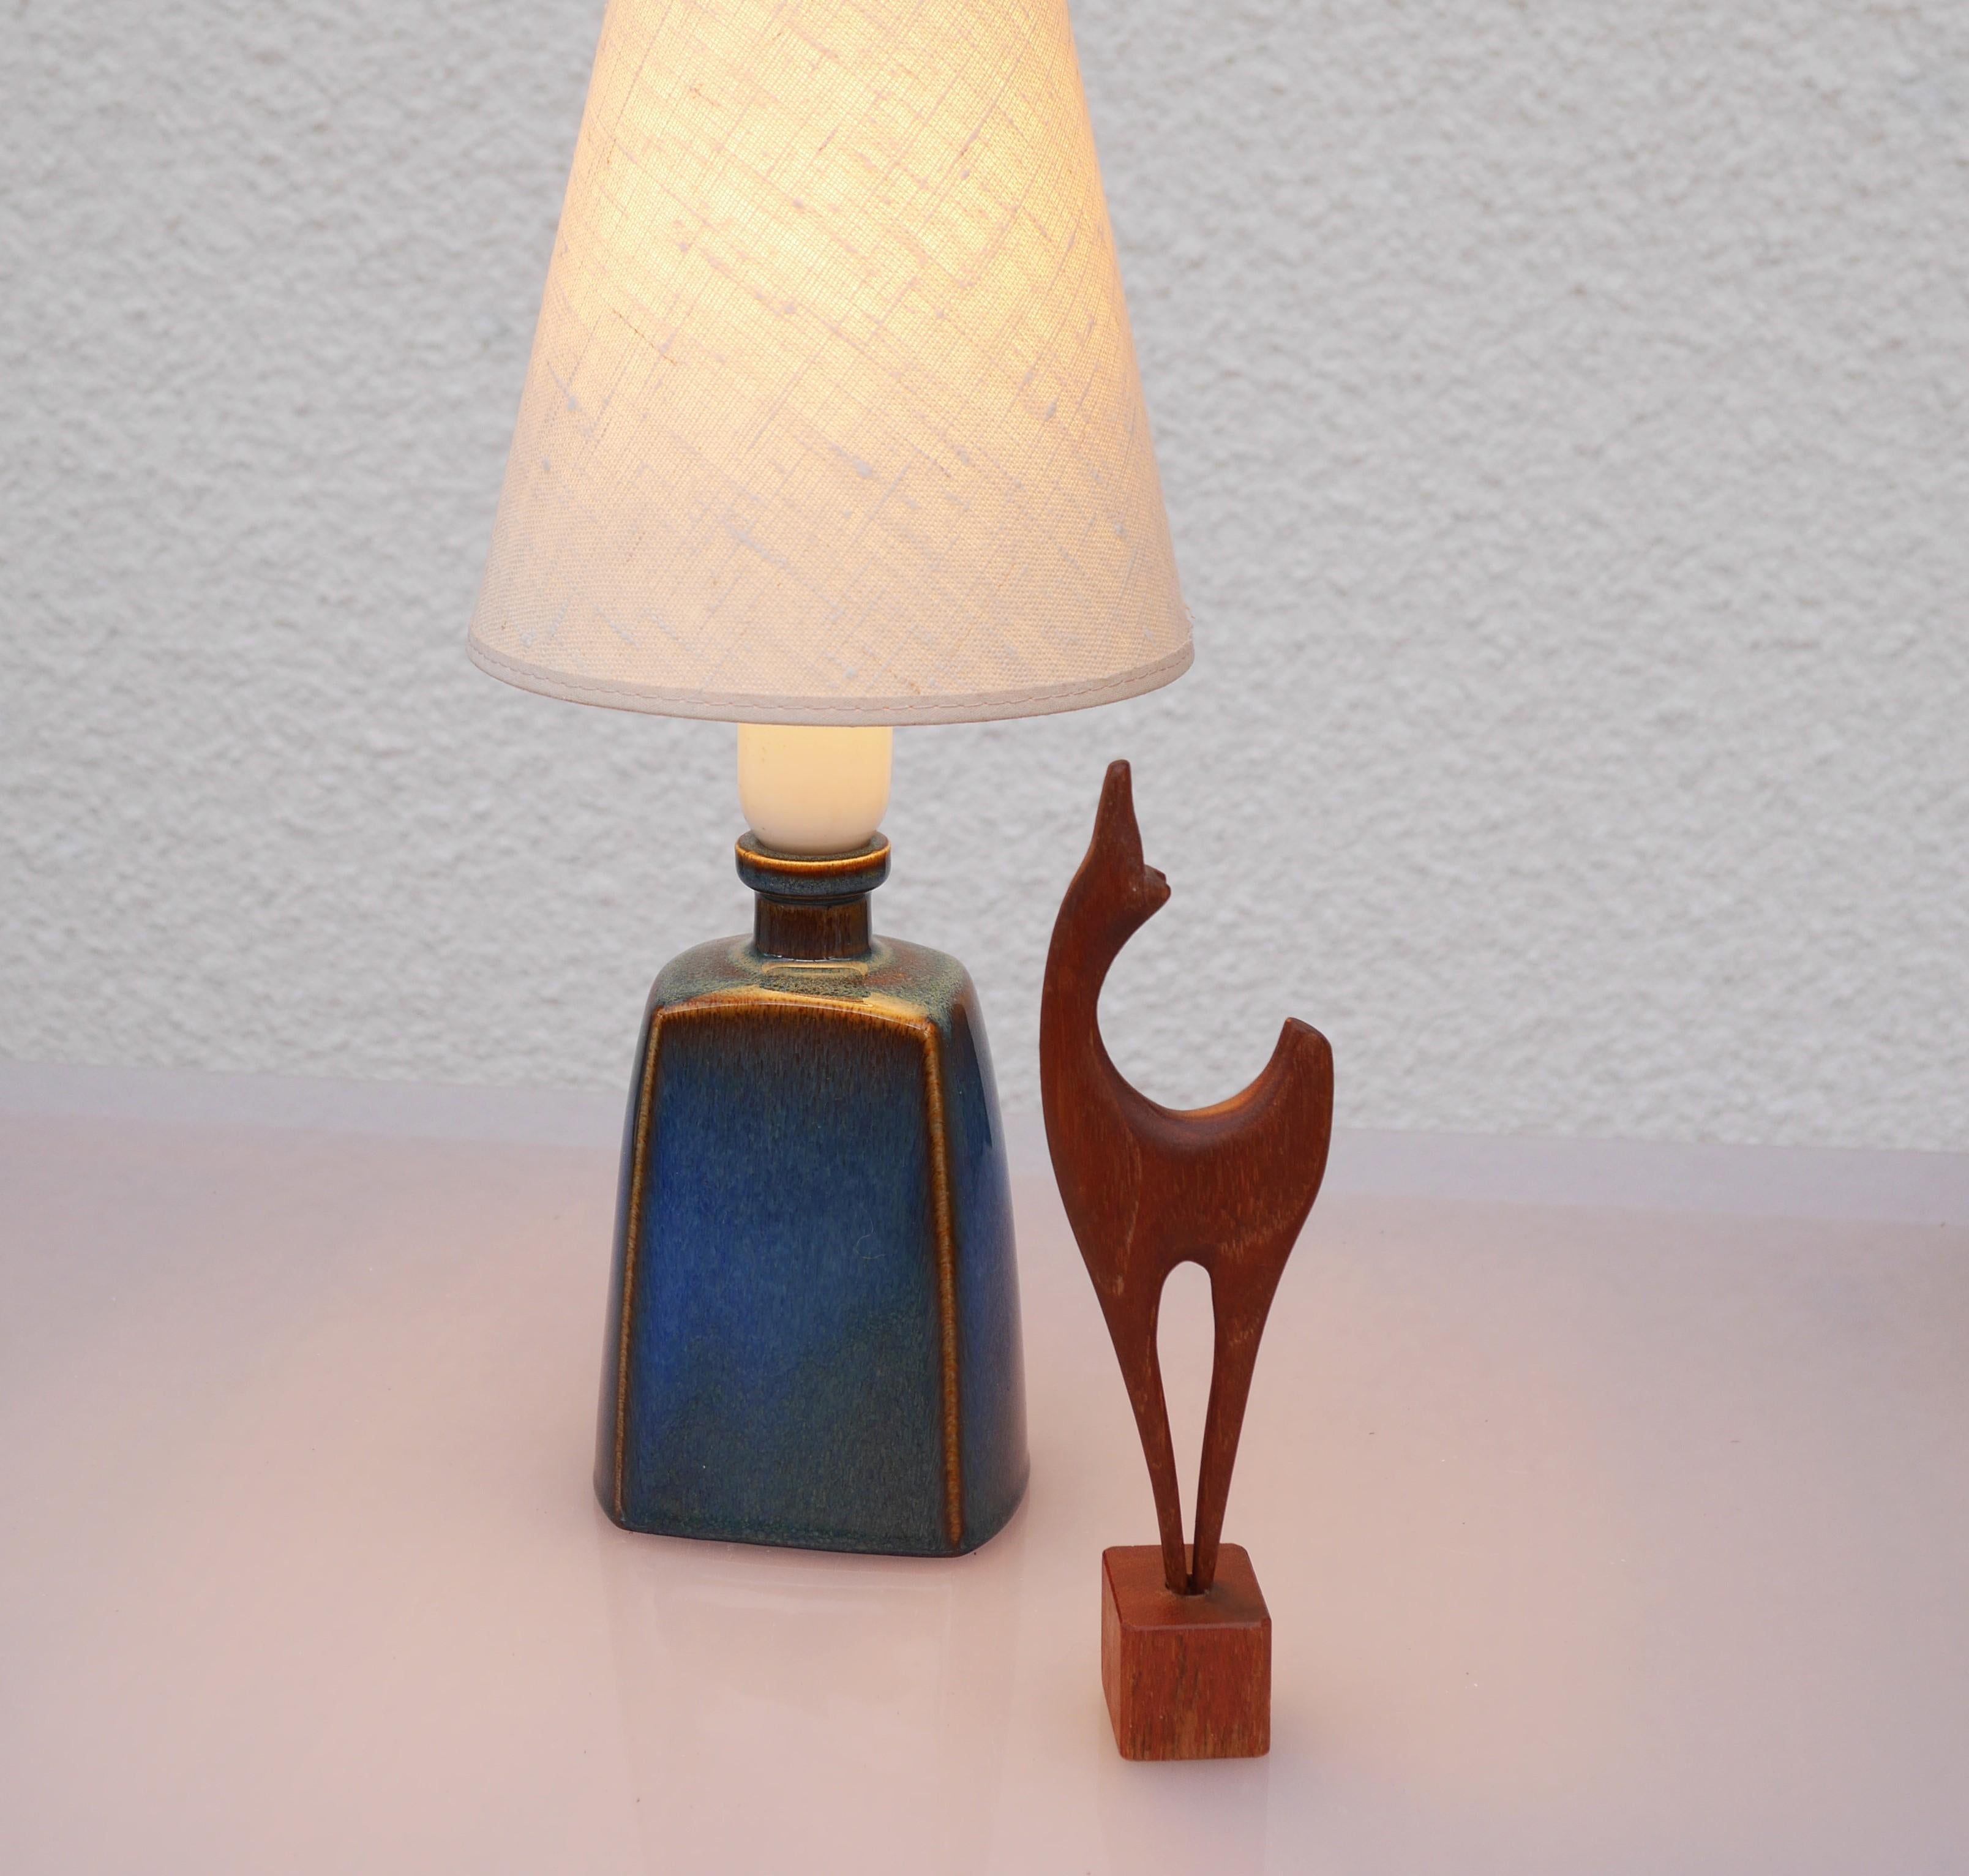 A very cute and handmade vintage ceramic lamp base made by Sven Jonsson, known as 